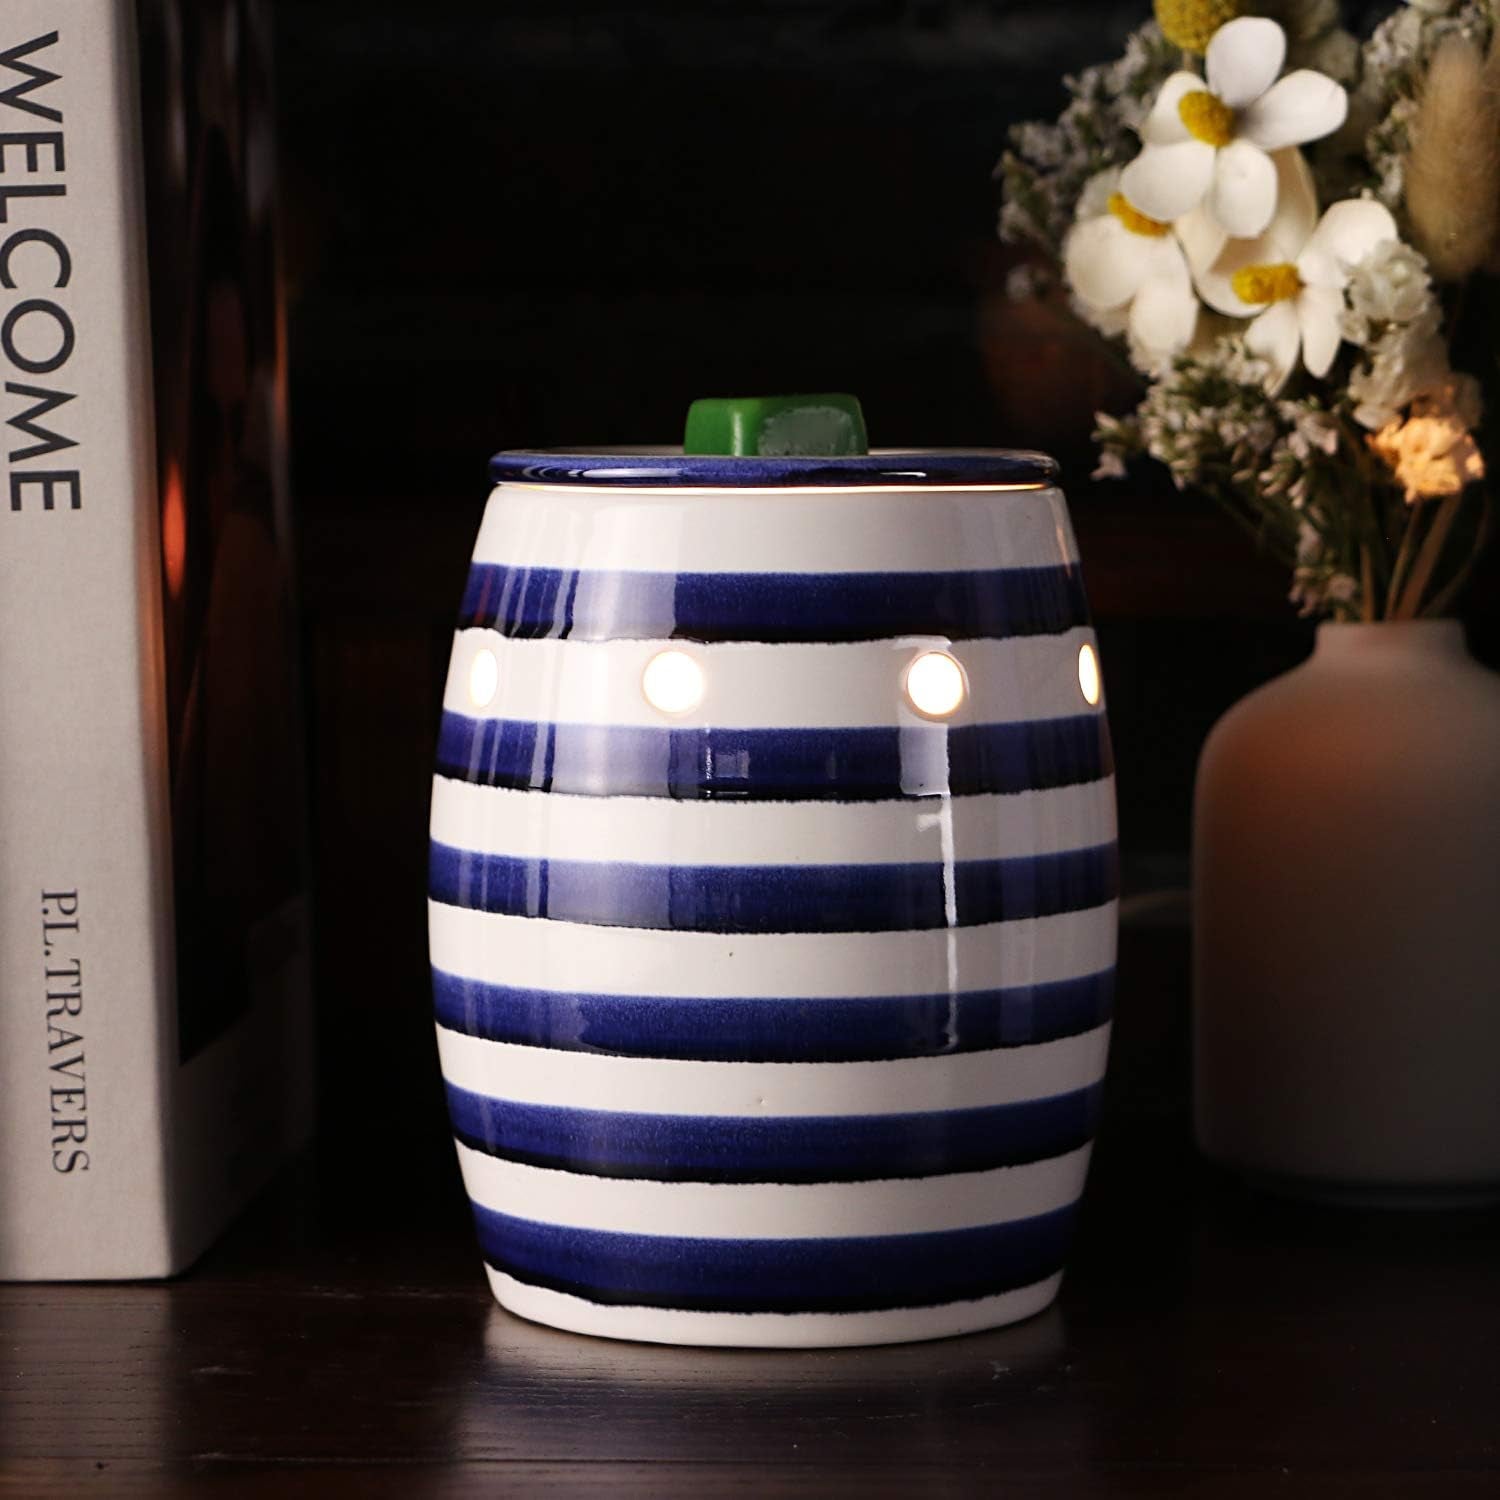 Starmoon Scentsy Wax Warmer for Home Décor, Electric Wax Warmer, No Flame, No Smoke, No Soot, Removable Dish, with One More Bulb (Blue&White)